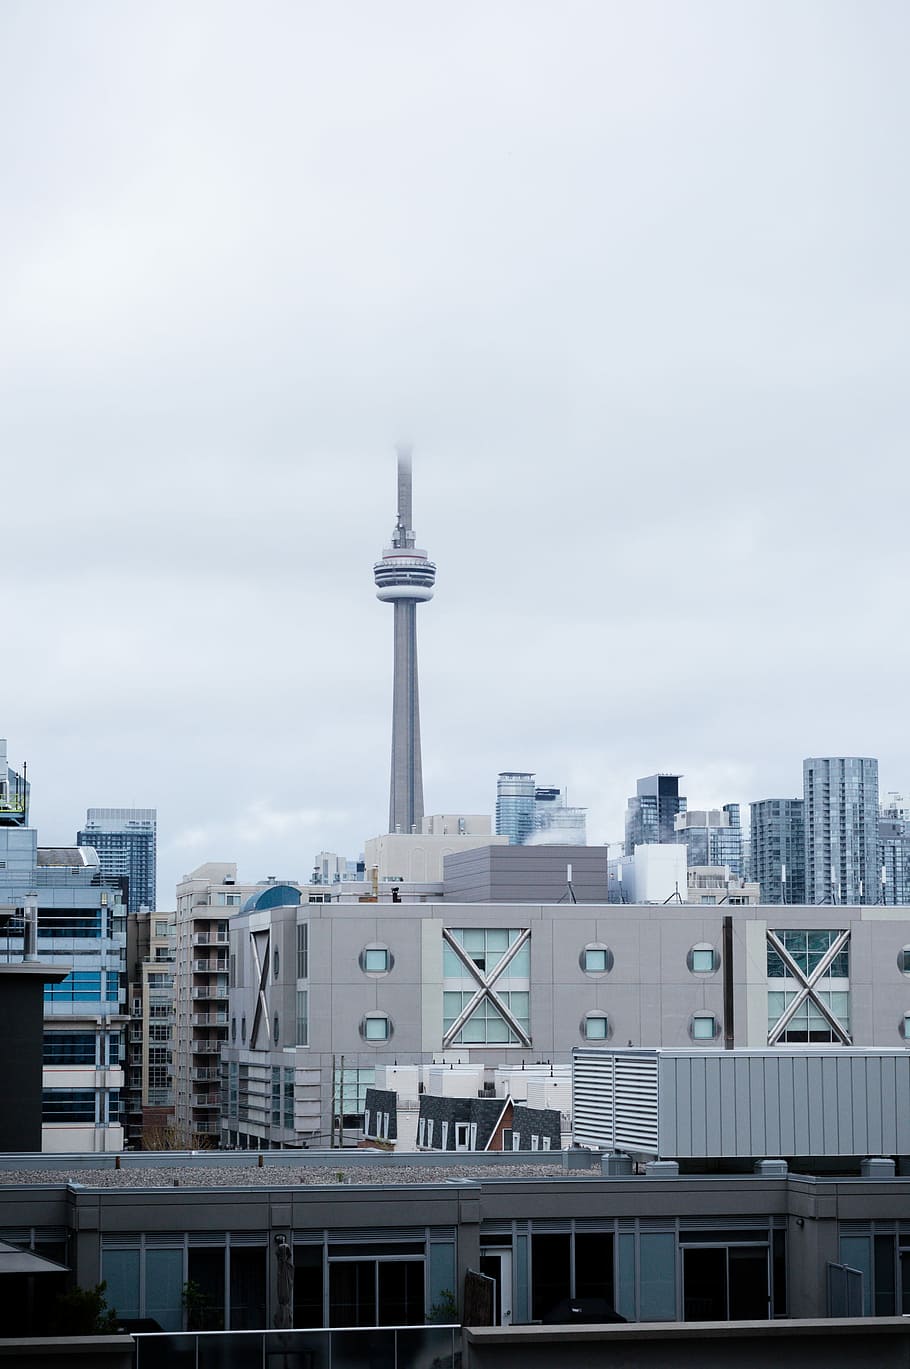 gray buildings, photography of CN Tower, windows, architecture